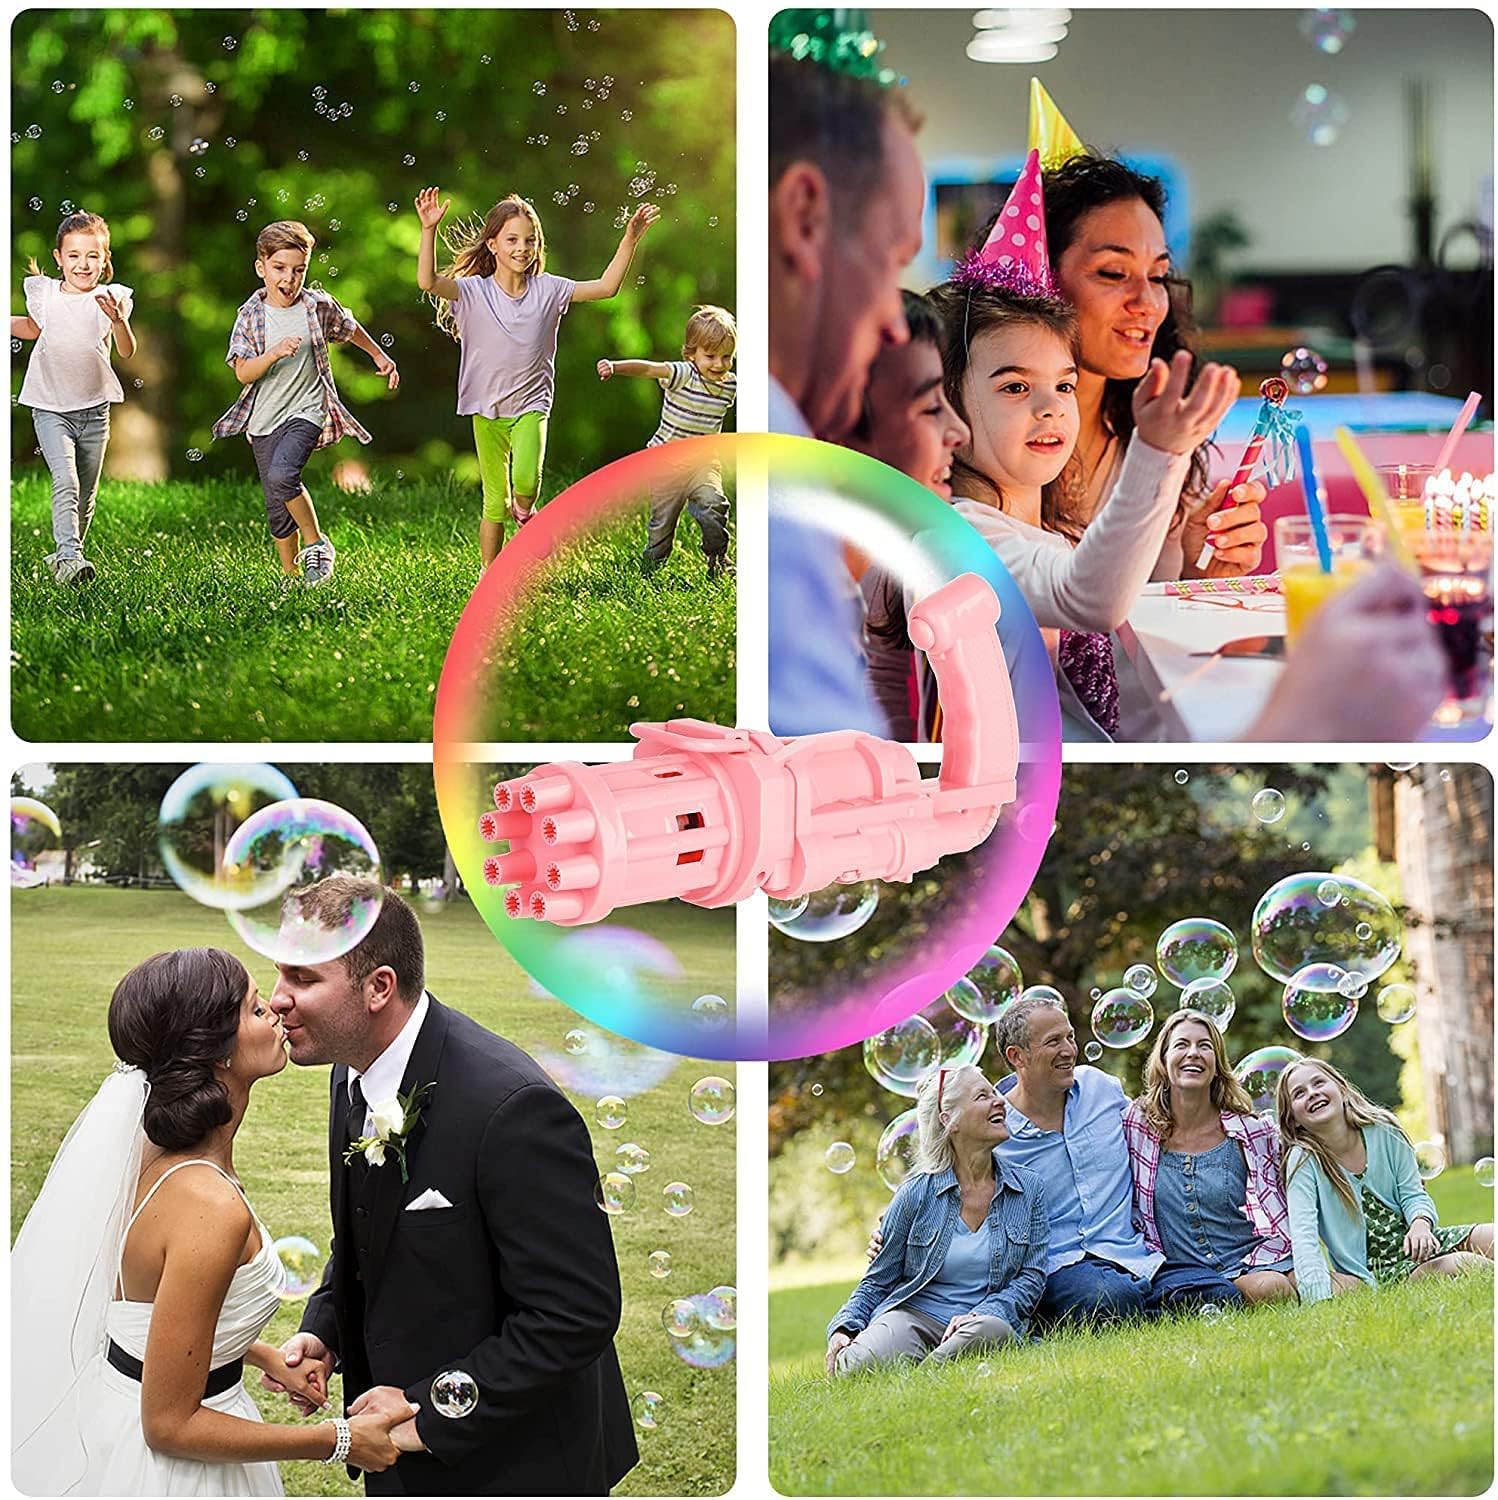 Braintastic 8 Hole Electric Gatling Bubble Gun for Kids with Soap Solution Indoor and Outdoor Toys for Toddlers Bubble Maker Gun Machine for Girls, Boys and for Parties (Multicolor, 3+ Year)